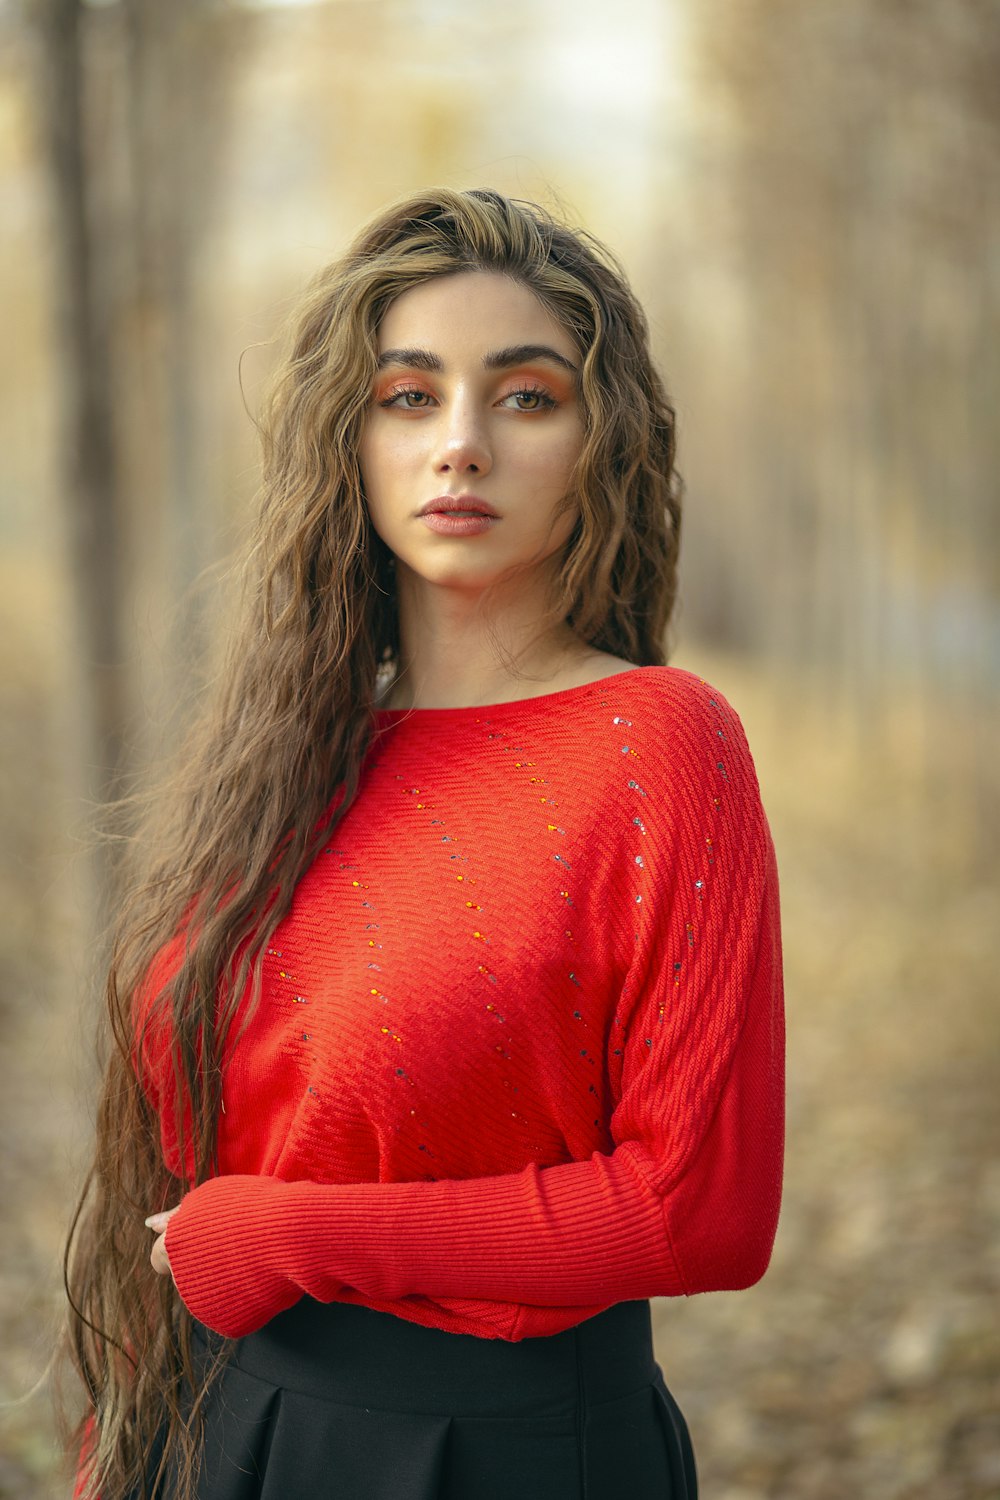 a woman with long hair wearing a red sweater